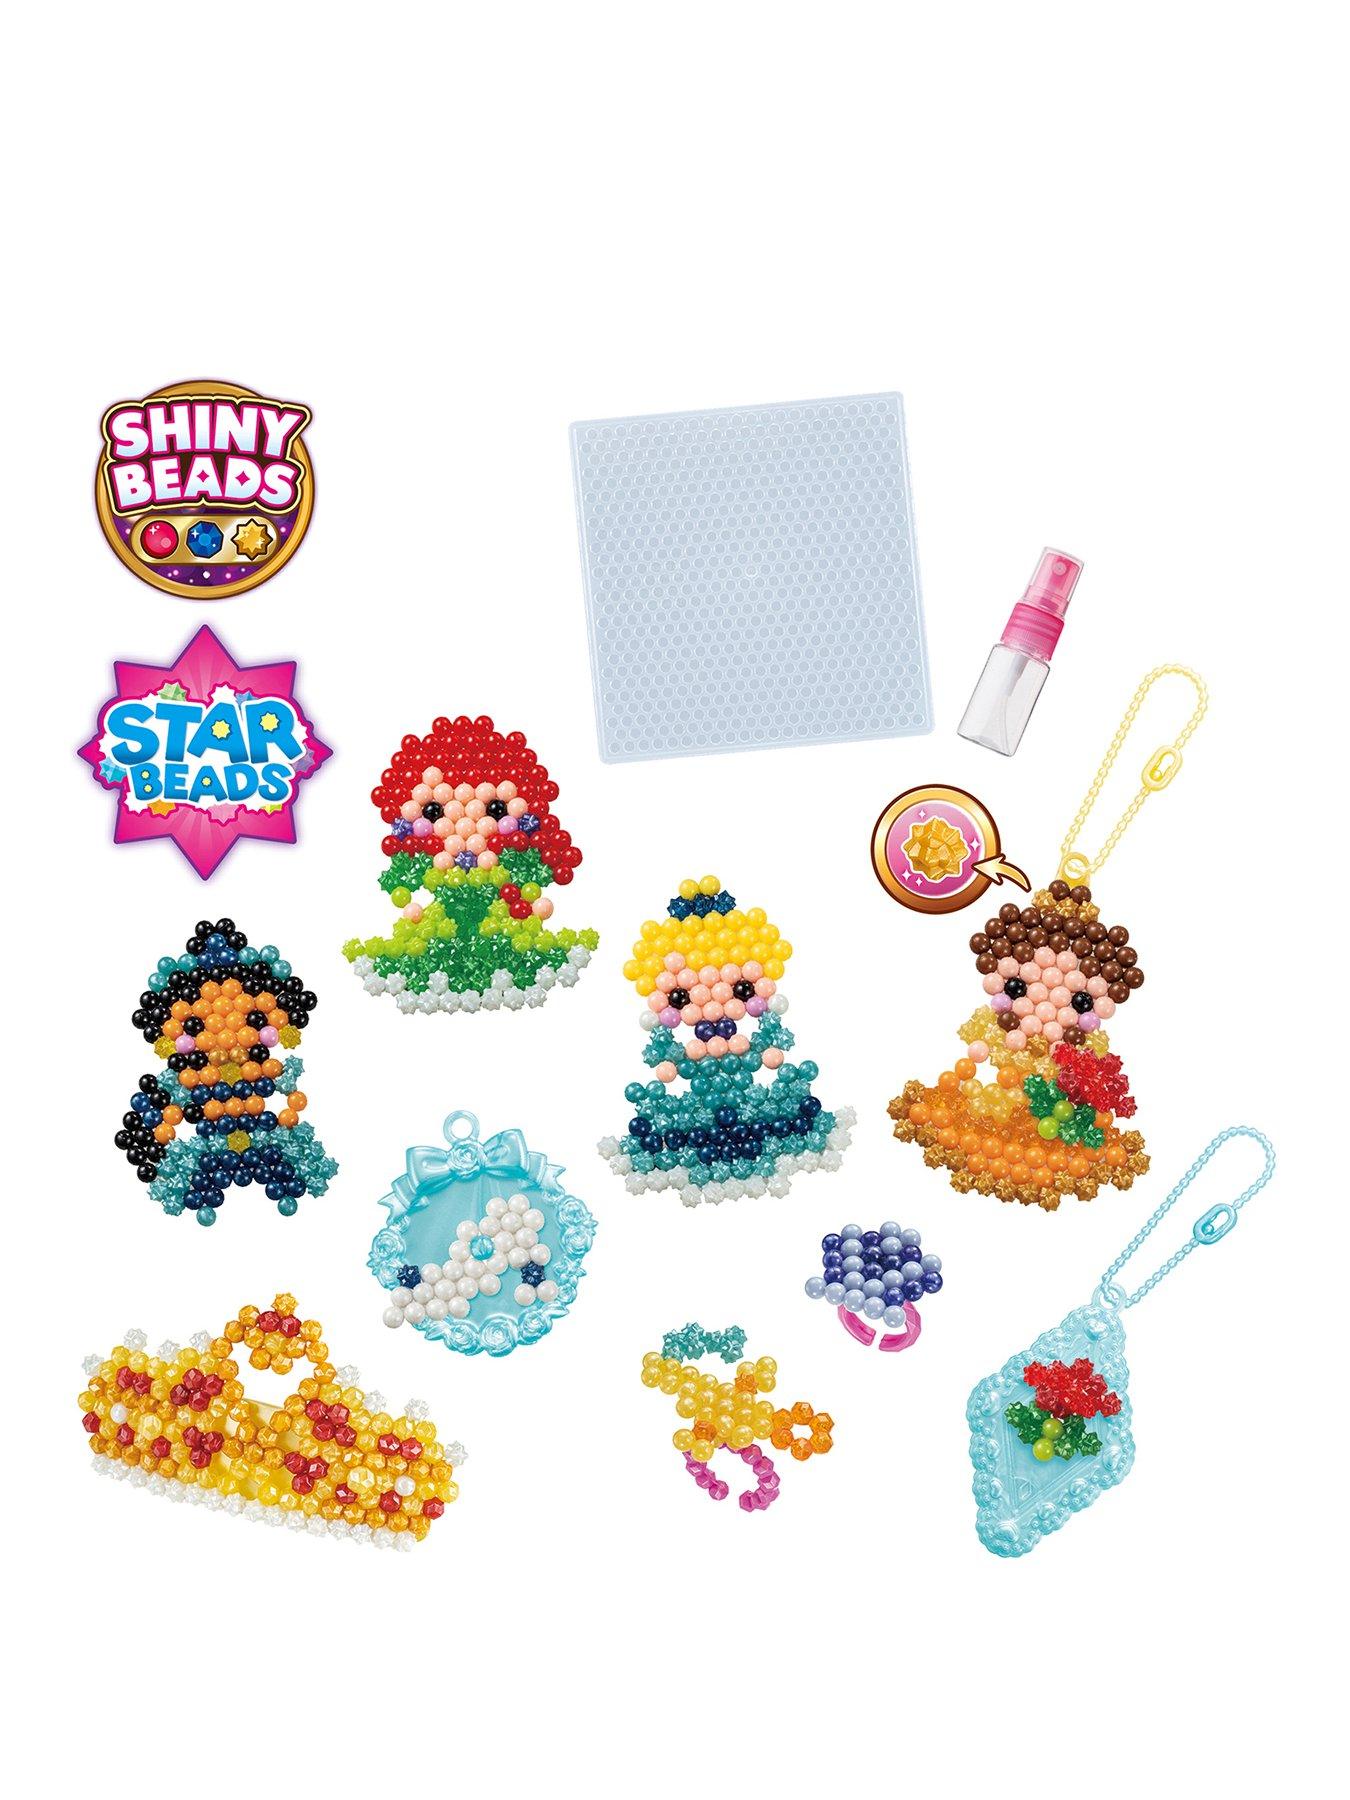 Aquabeads Fairy World Complete Arts & Crafts Bead Kit for Childrens - Over  800 Beads to Create Wearable Rings, Bracelets, Keychains and More!